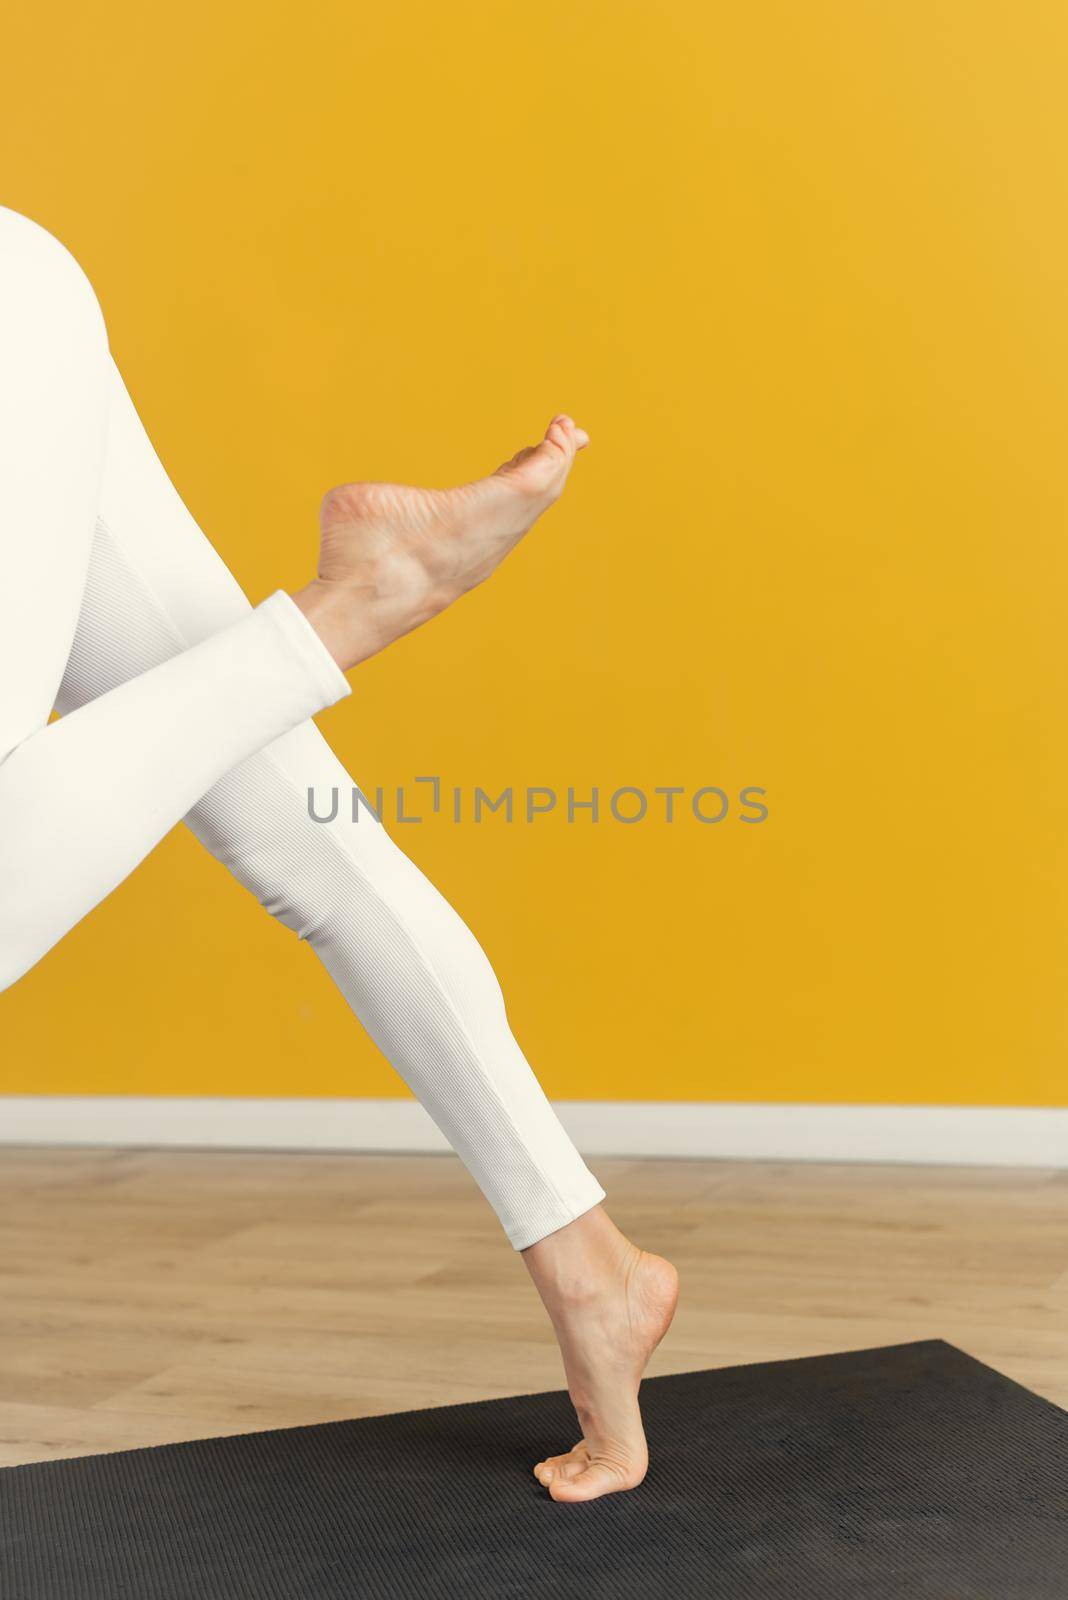 Women's legs in a yoga pose on a yellow background. Close up. Leg stretching concept.